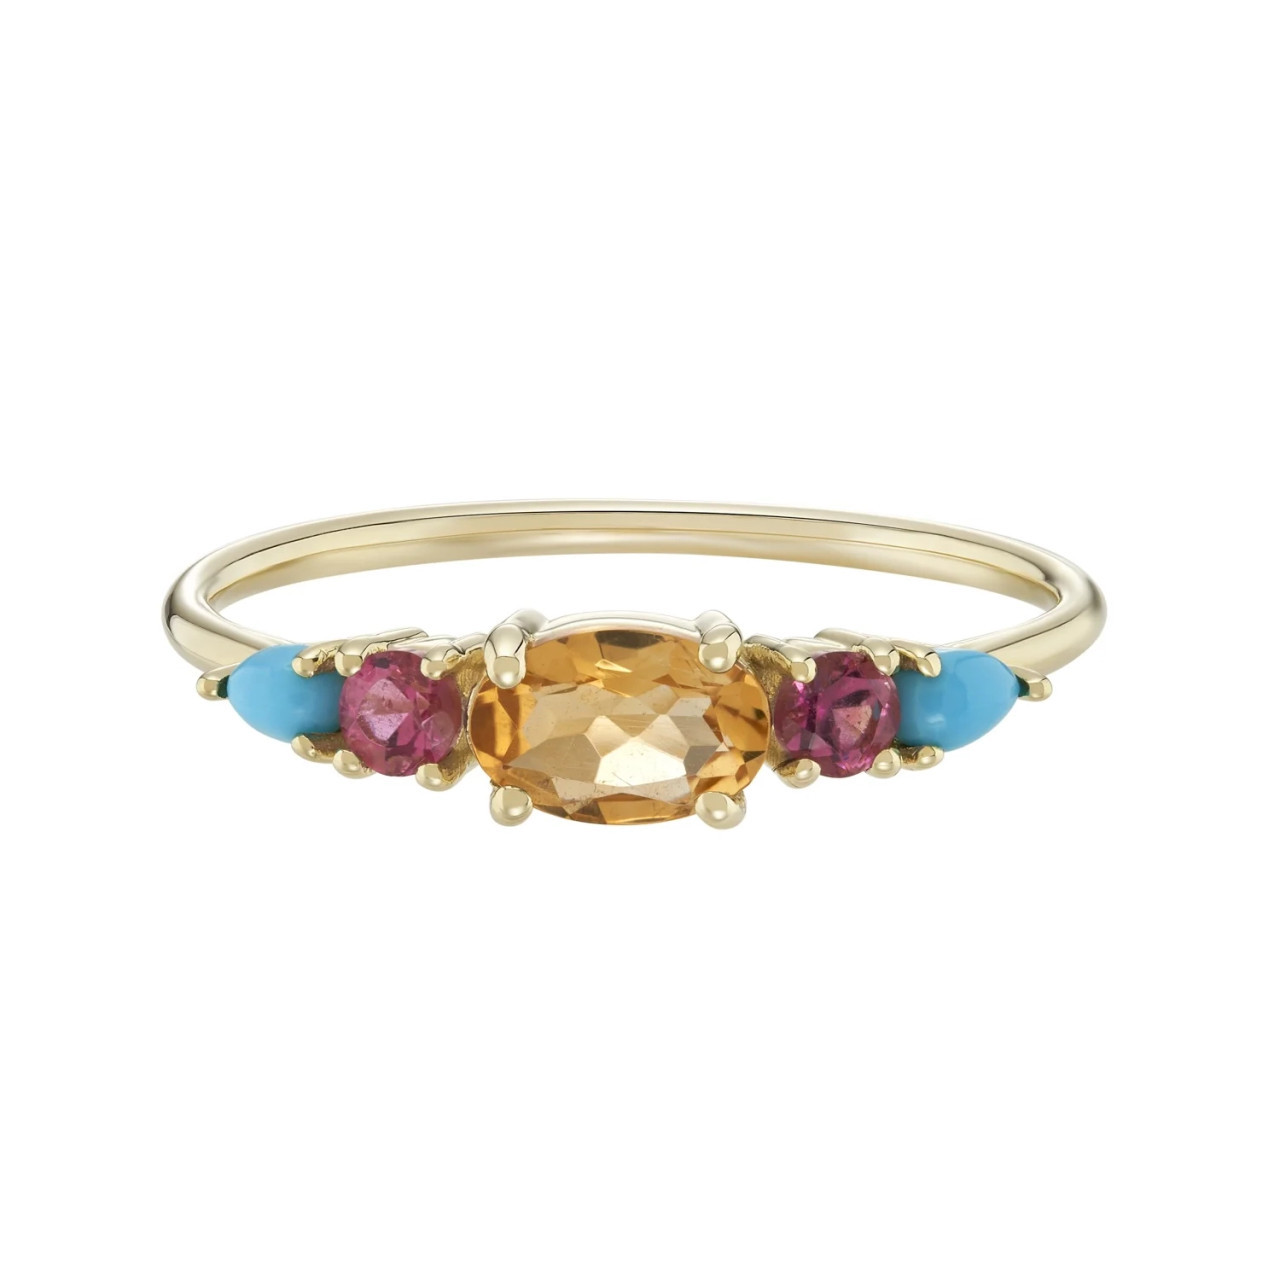 Multi Gemstone Claw Set Ring with Citrine, Pink Tourmaline & Turquoise, by metier by tomfoolery